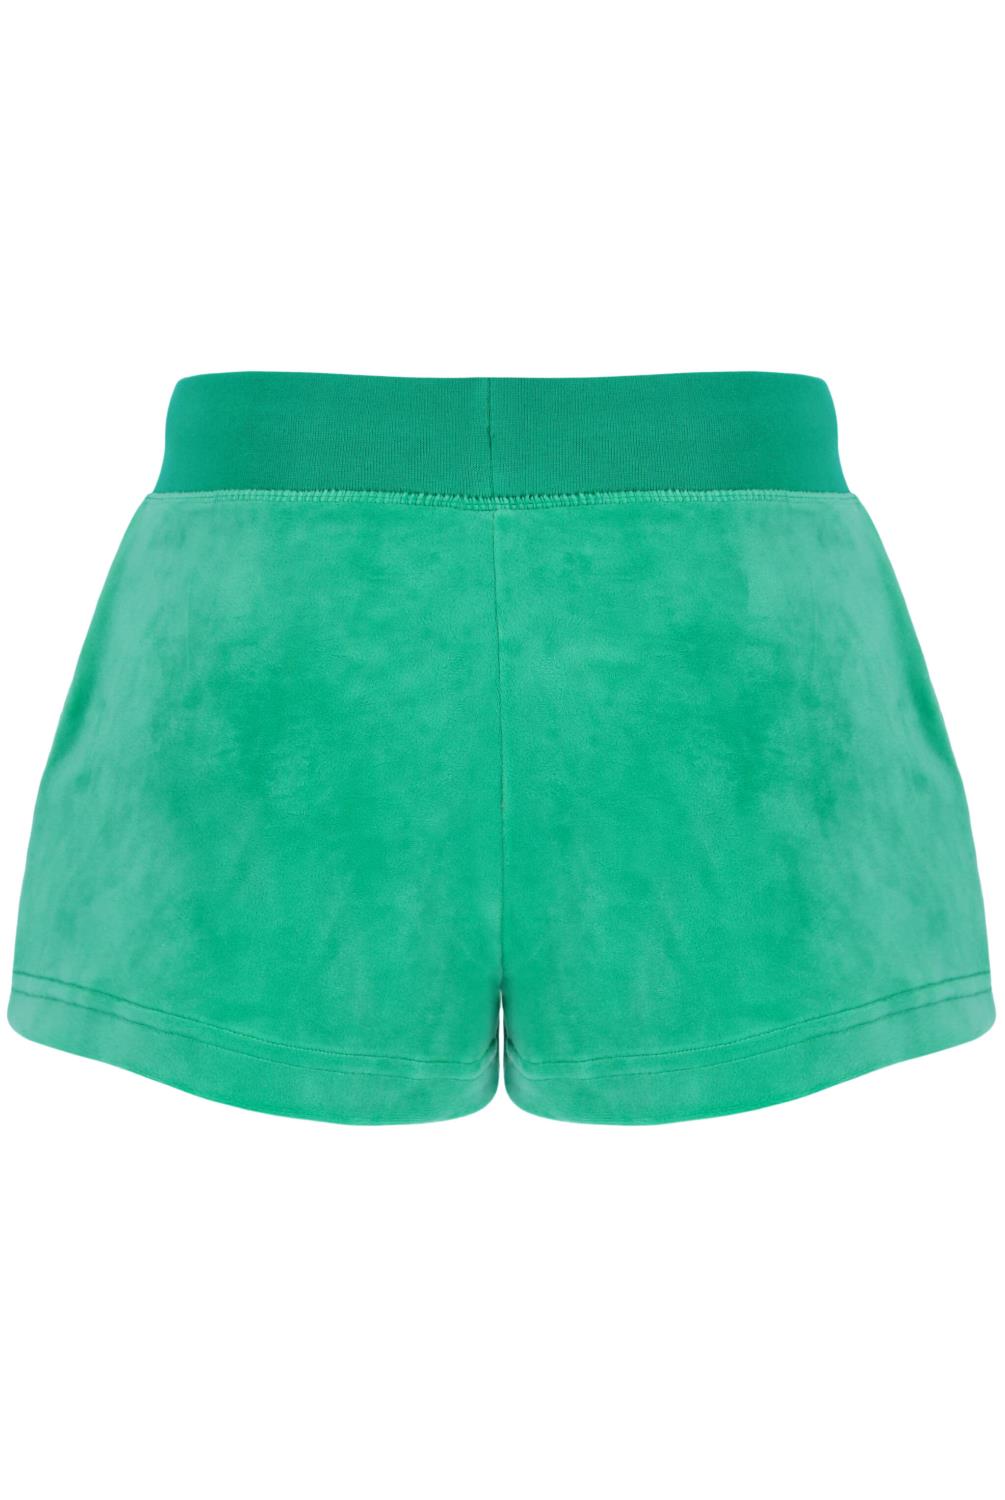 gallery-4396-for-Eve- Classic Gumdrop Green